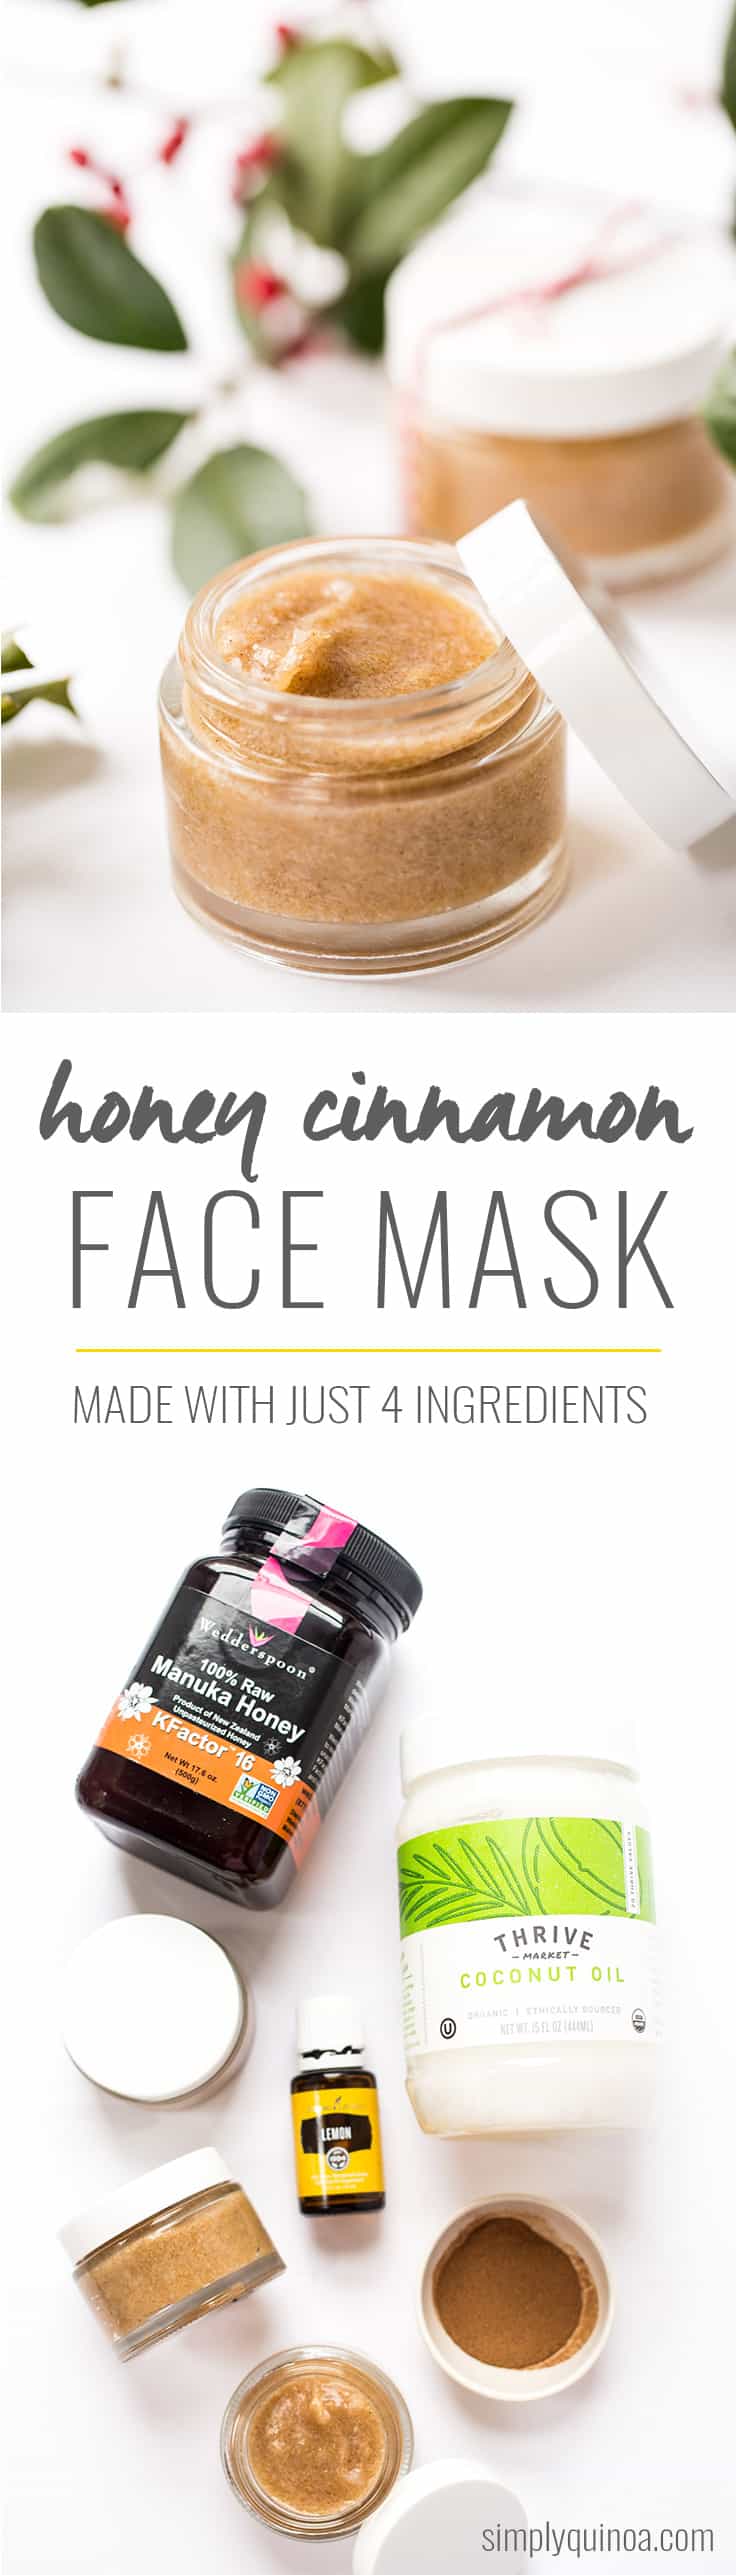 This DIY Honey Cinnamon Face Mask uses just four ingredients and is AMAZING! Smells so nice, is awesome for the skin and gives you a nice glow after you use it.